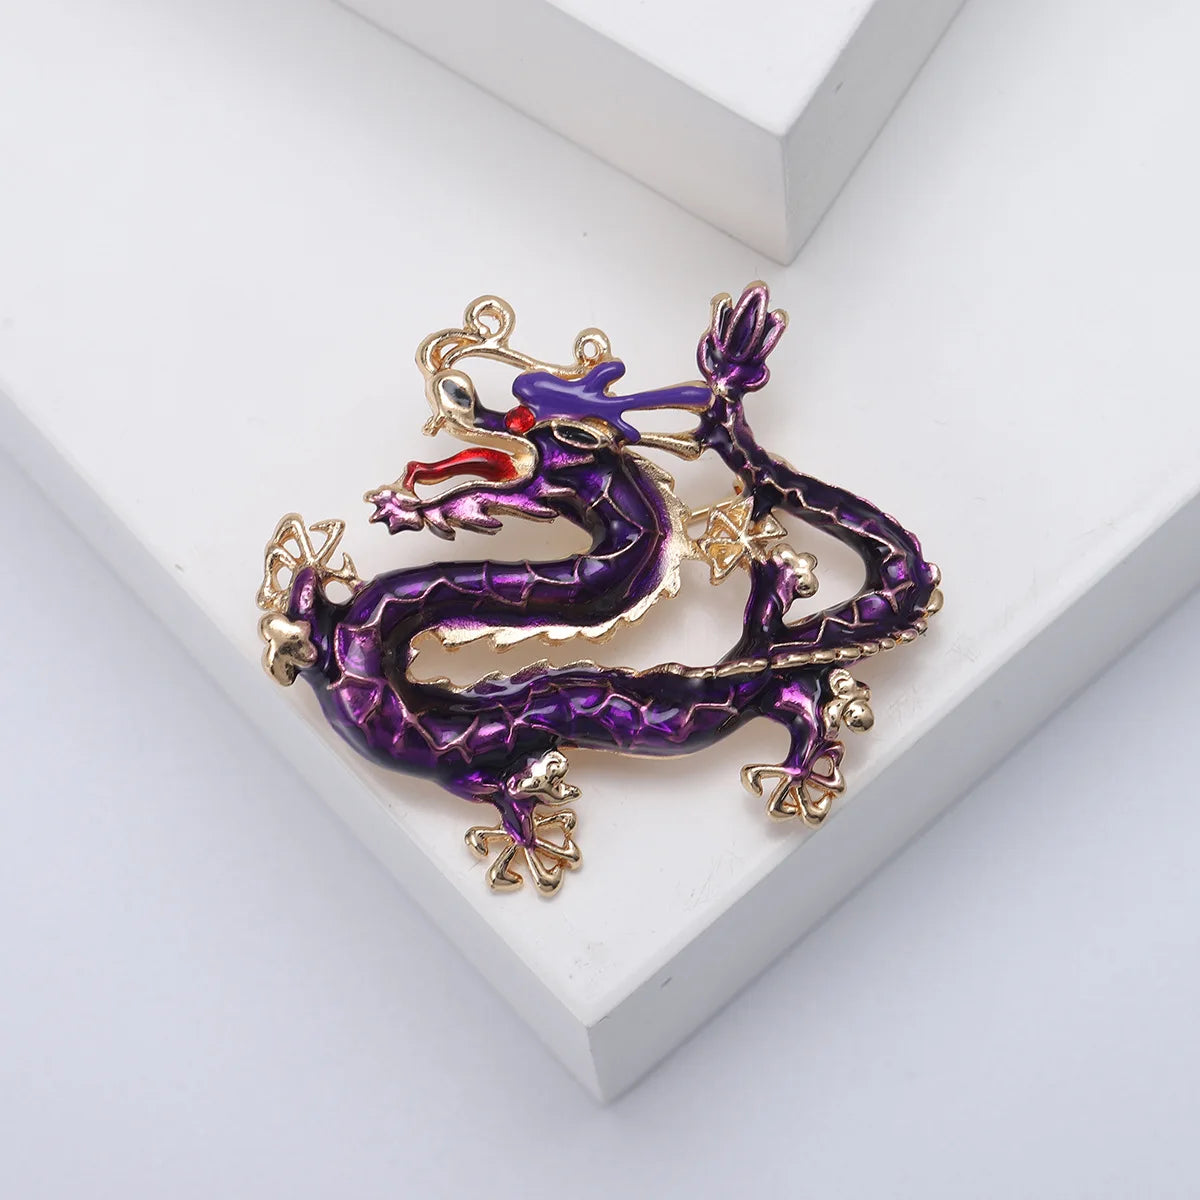 Dmari Women Brooch Chinese Vintage Dragon Badge Enamel Pin Luxury Jewelry Accessories For Women Clothing New Year Gifts